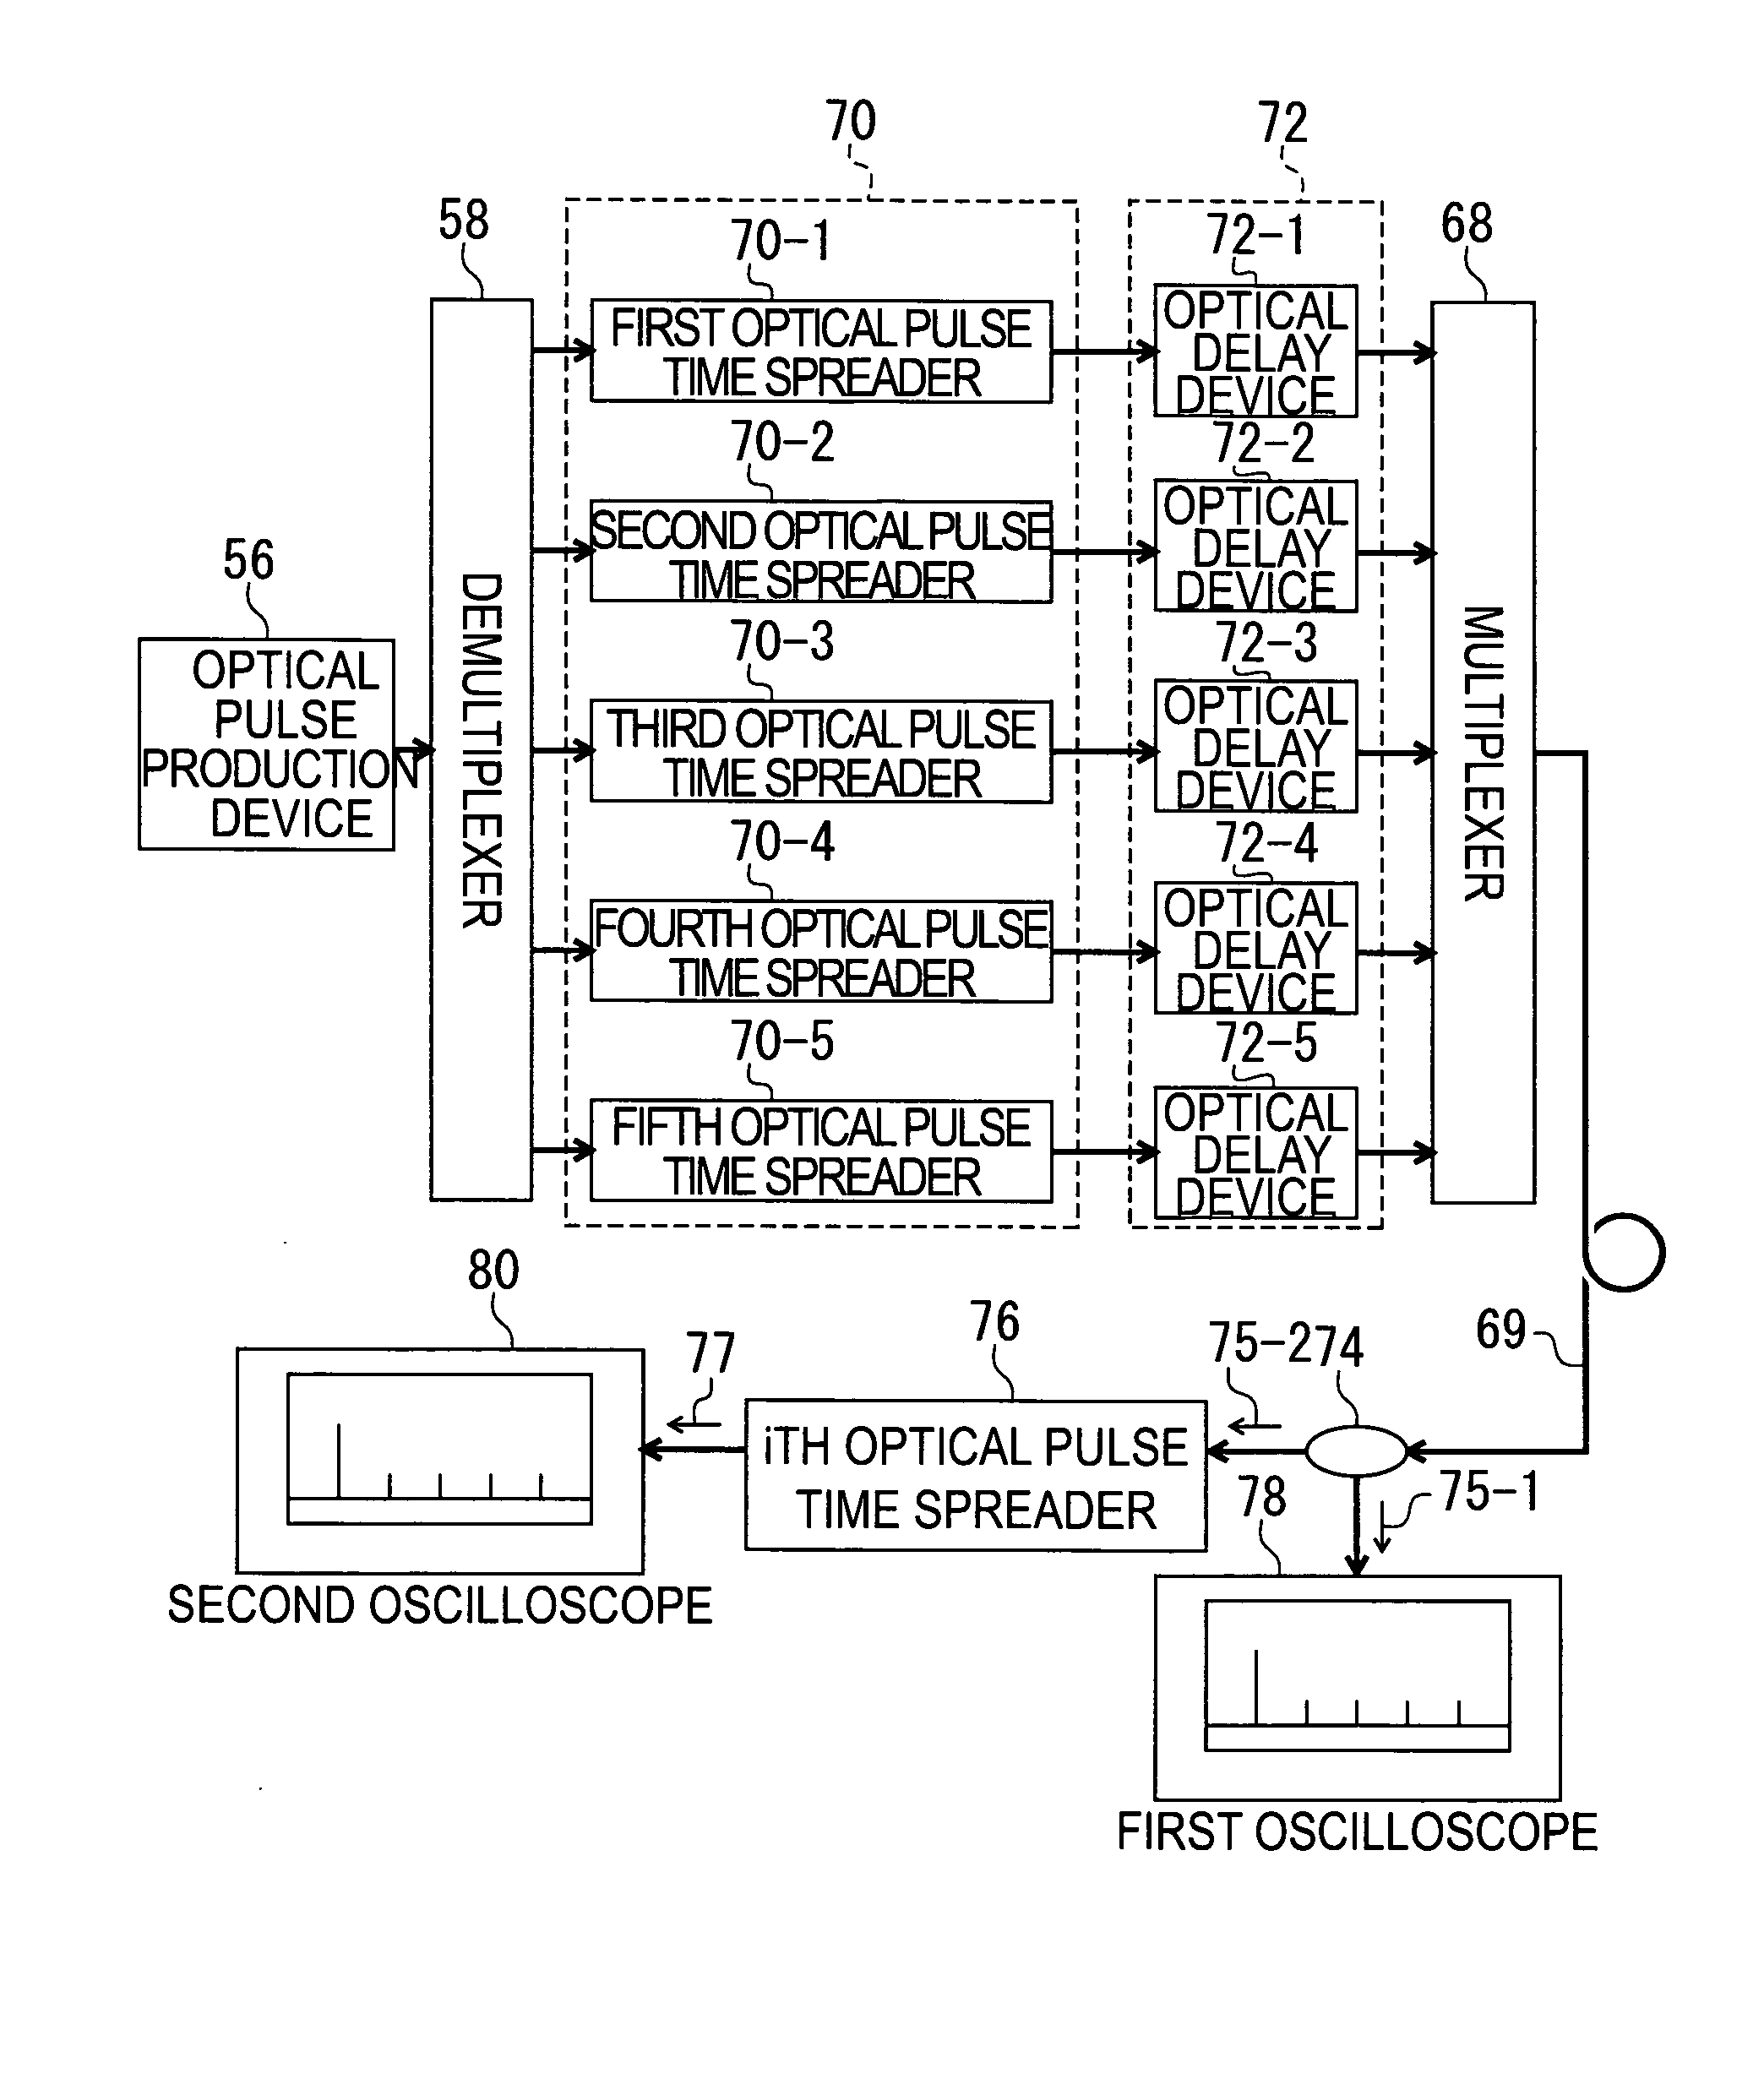 Optical pulse time spreading device